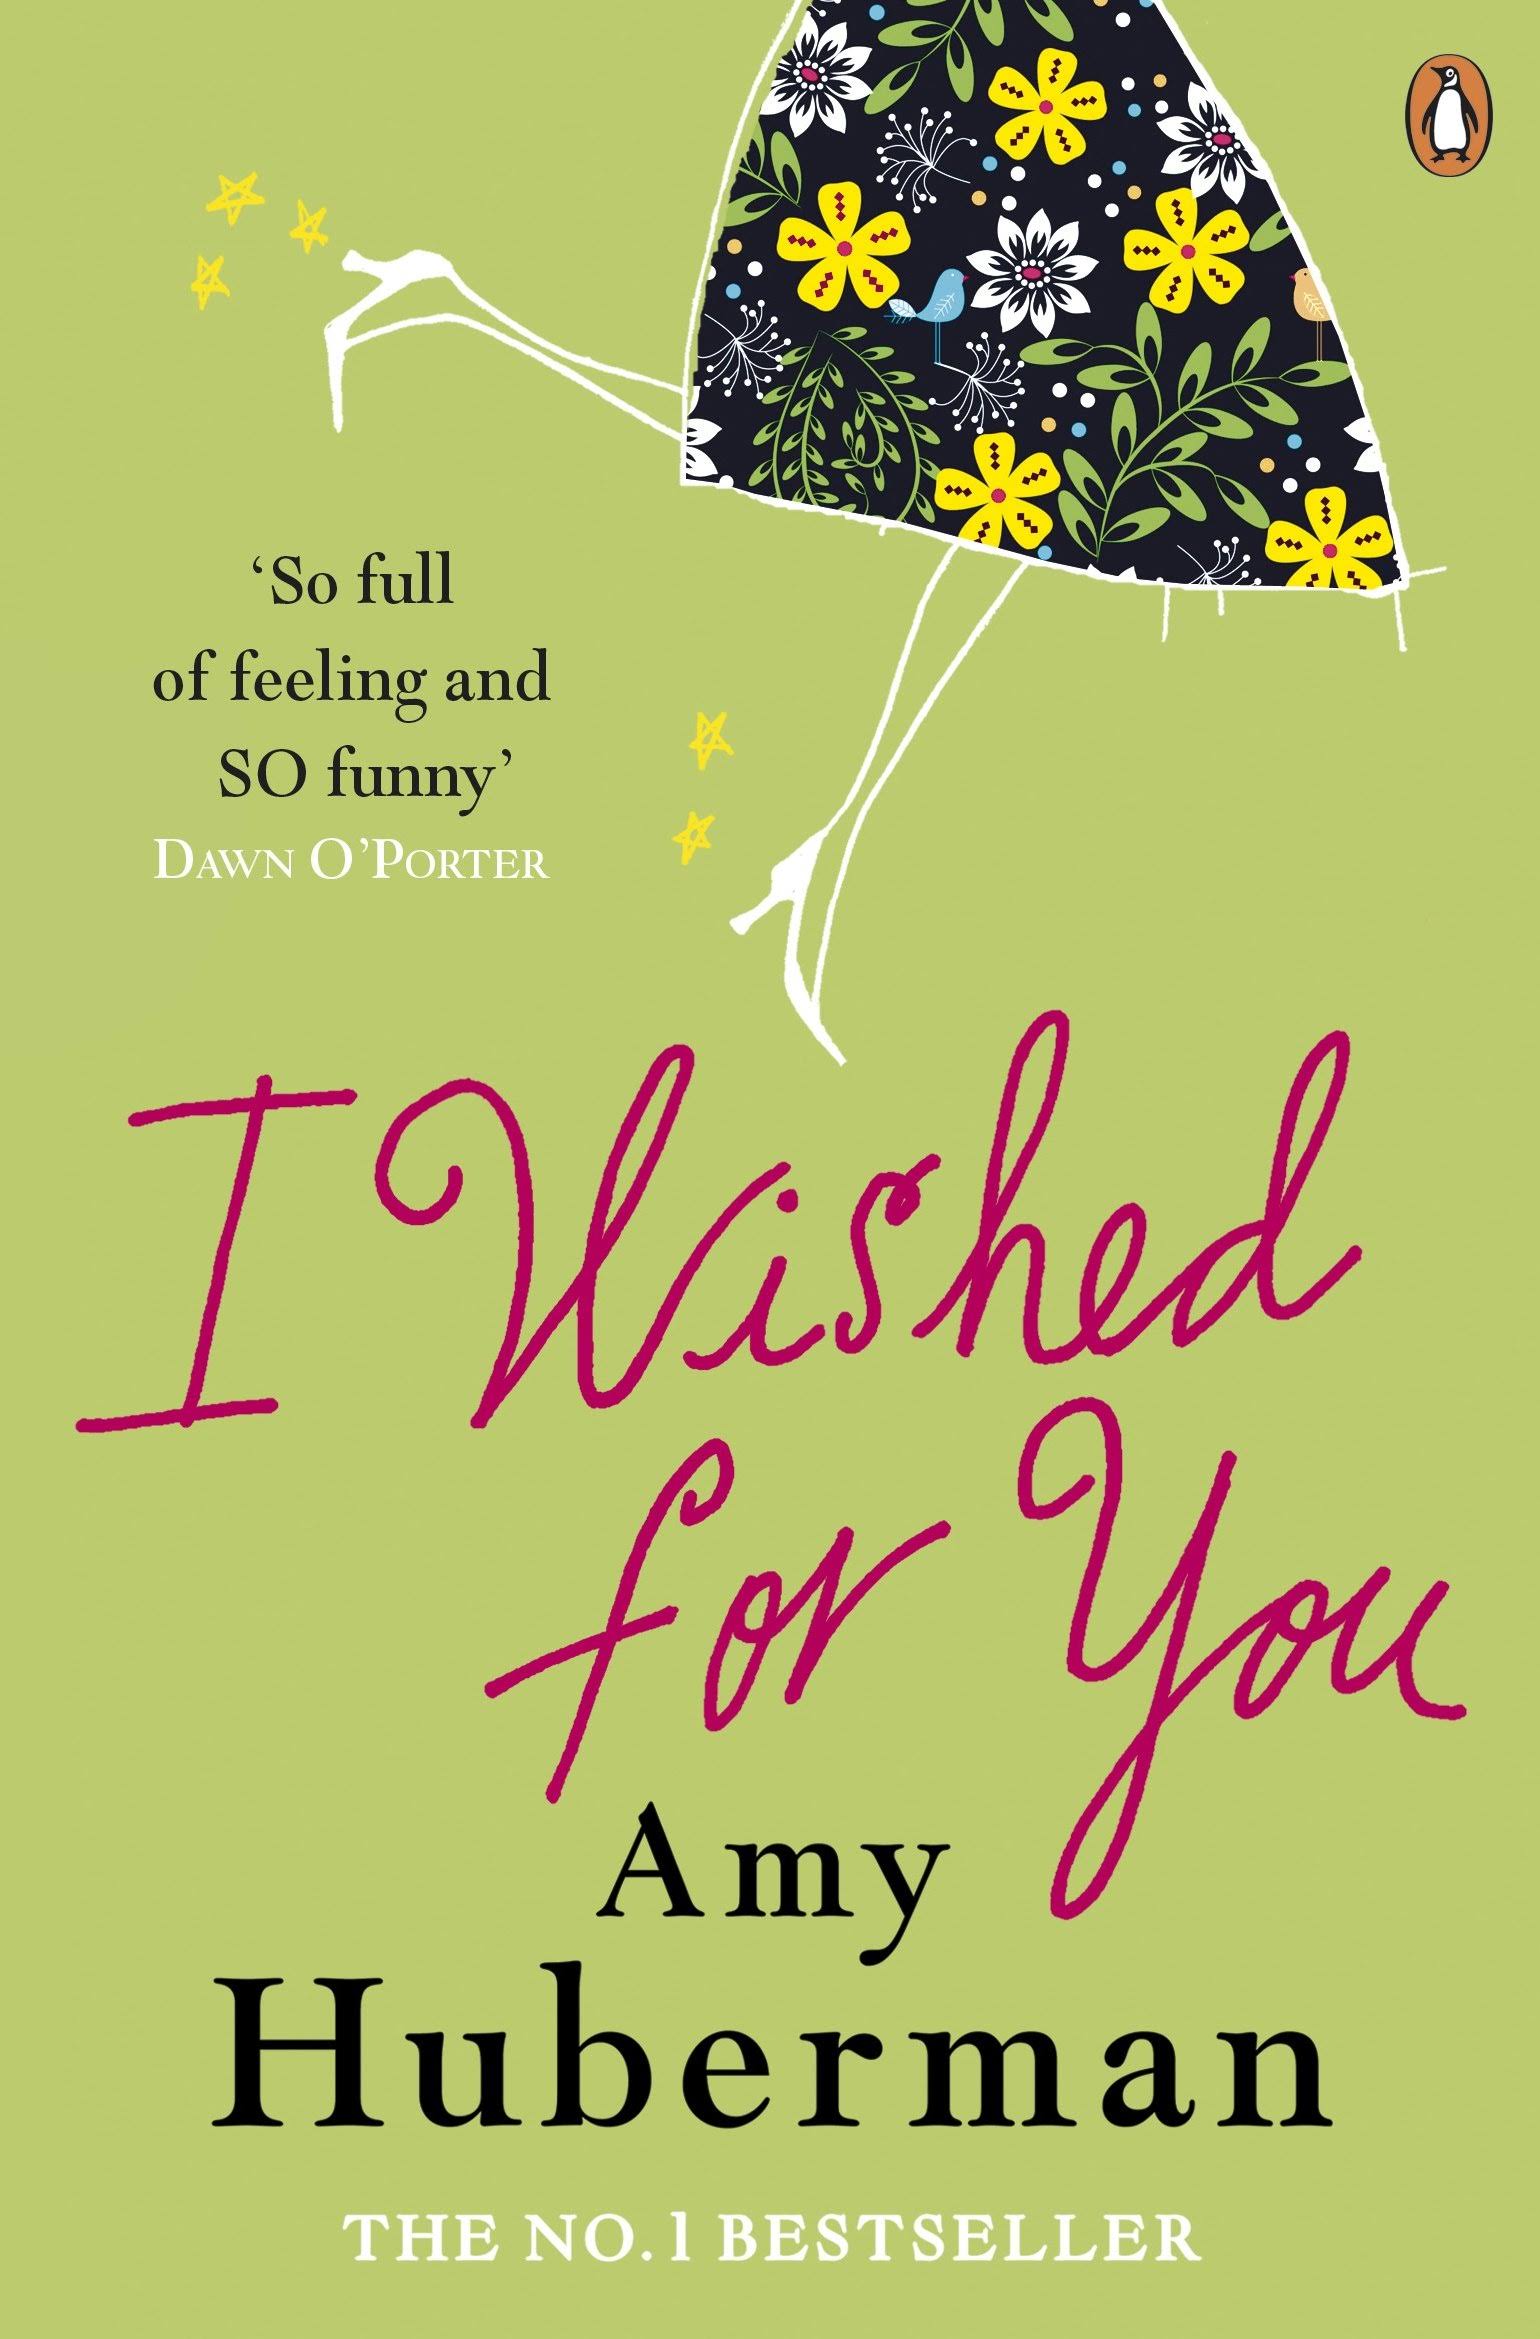 I Wished For You by Amy Huberman